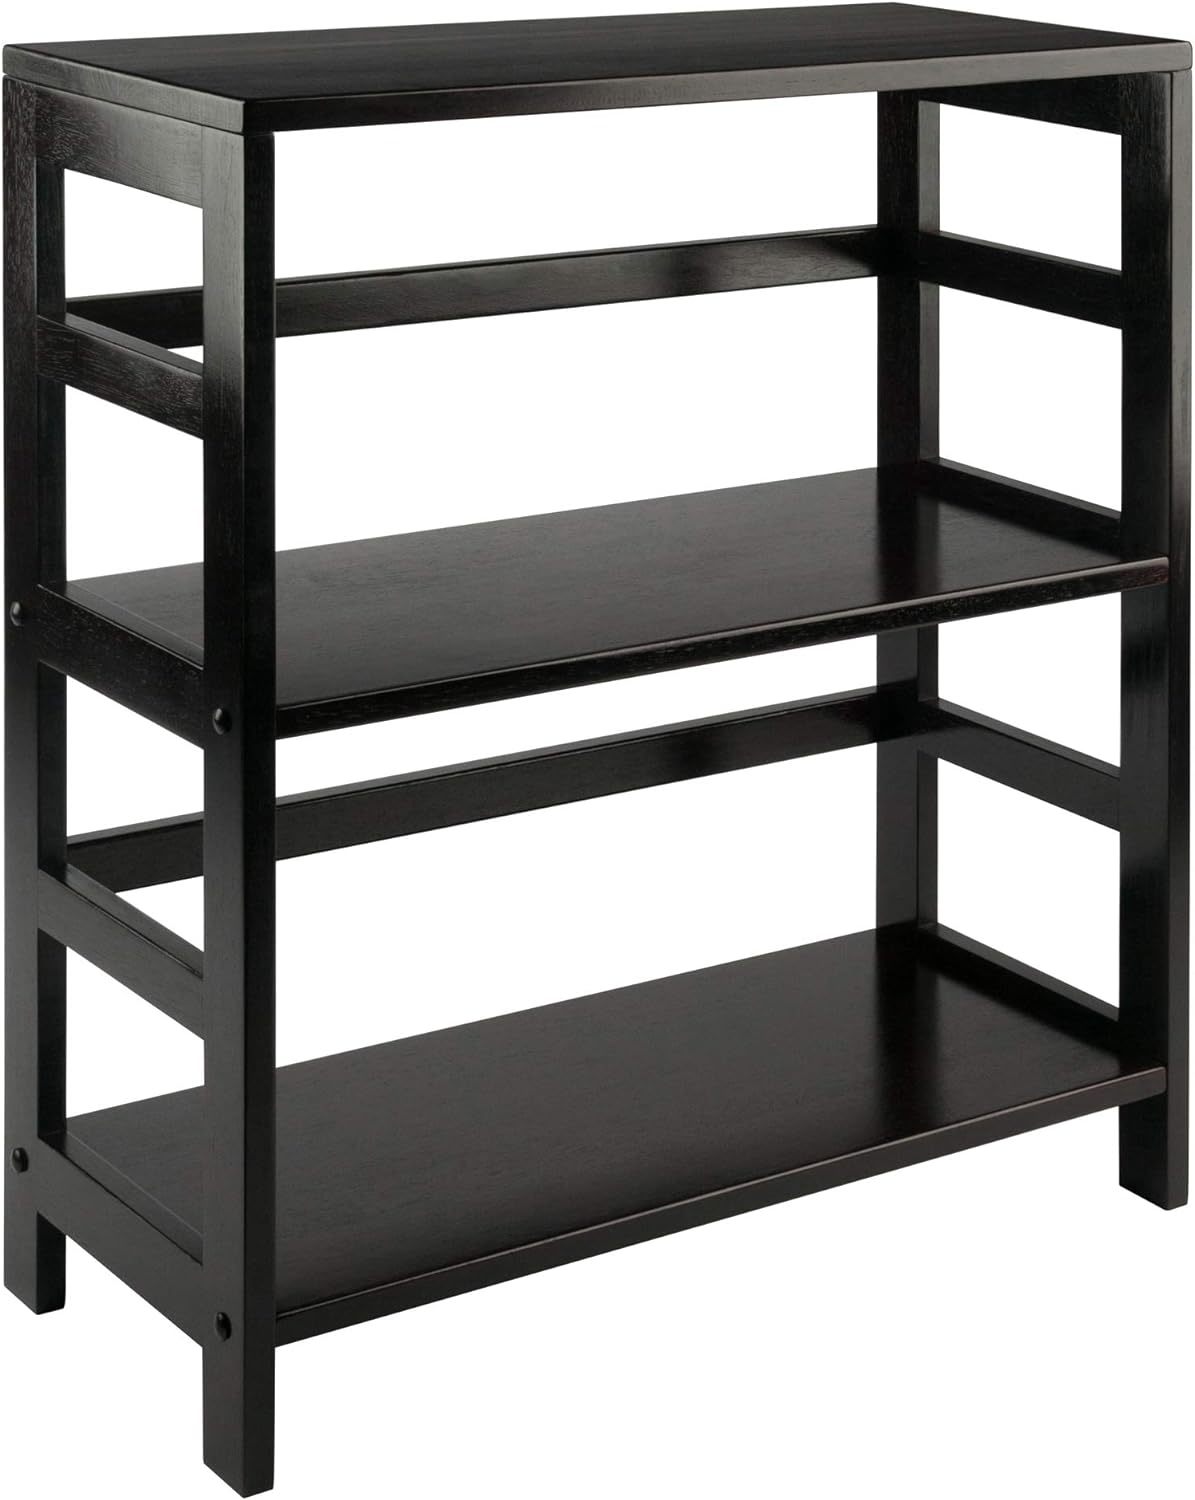 Small And Large Shelves, Espresso, Winsome Wood Leo Model. - $65.92